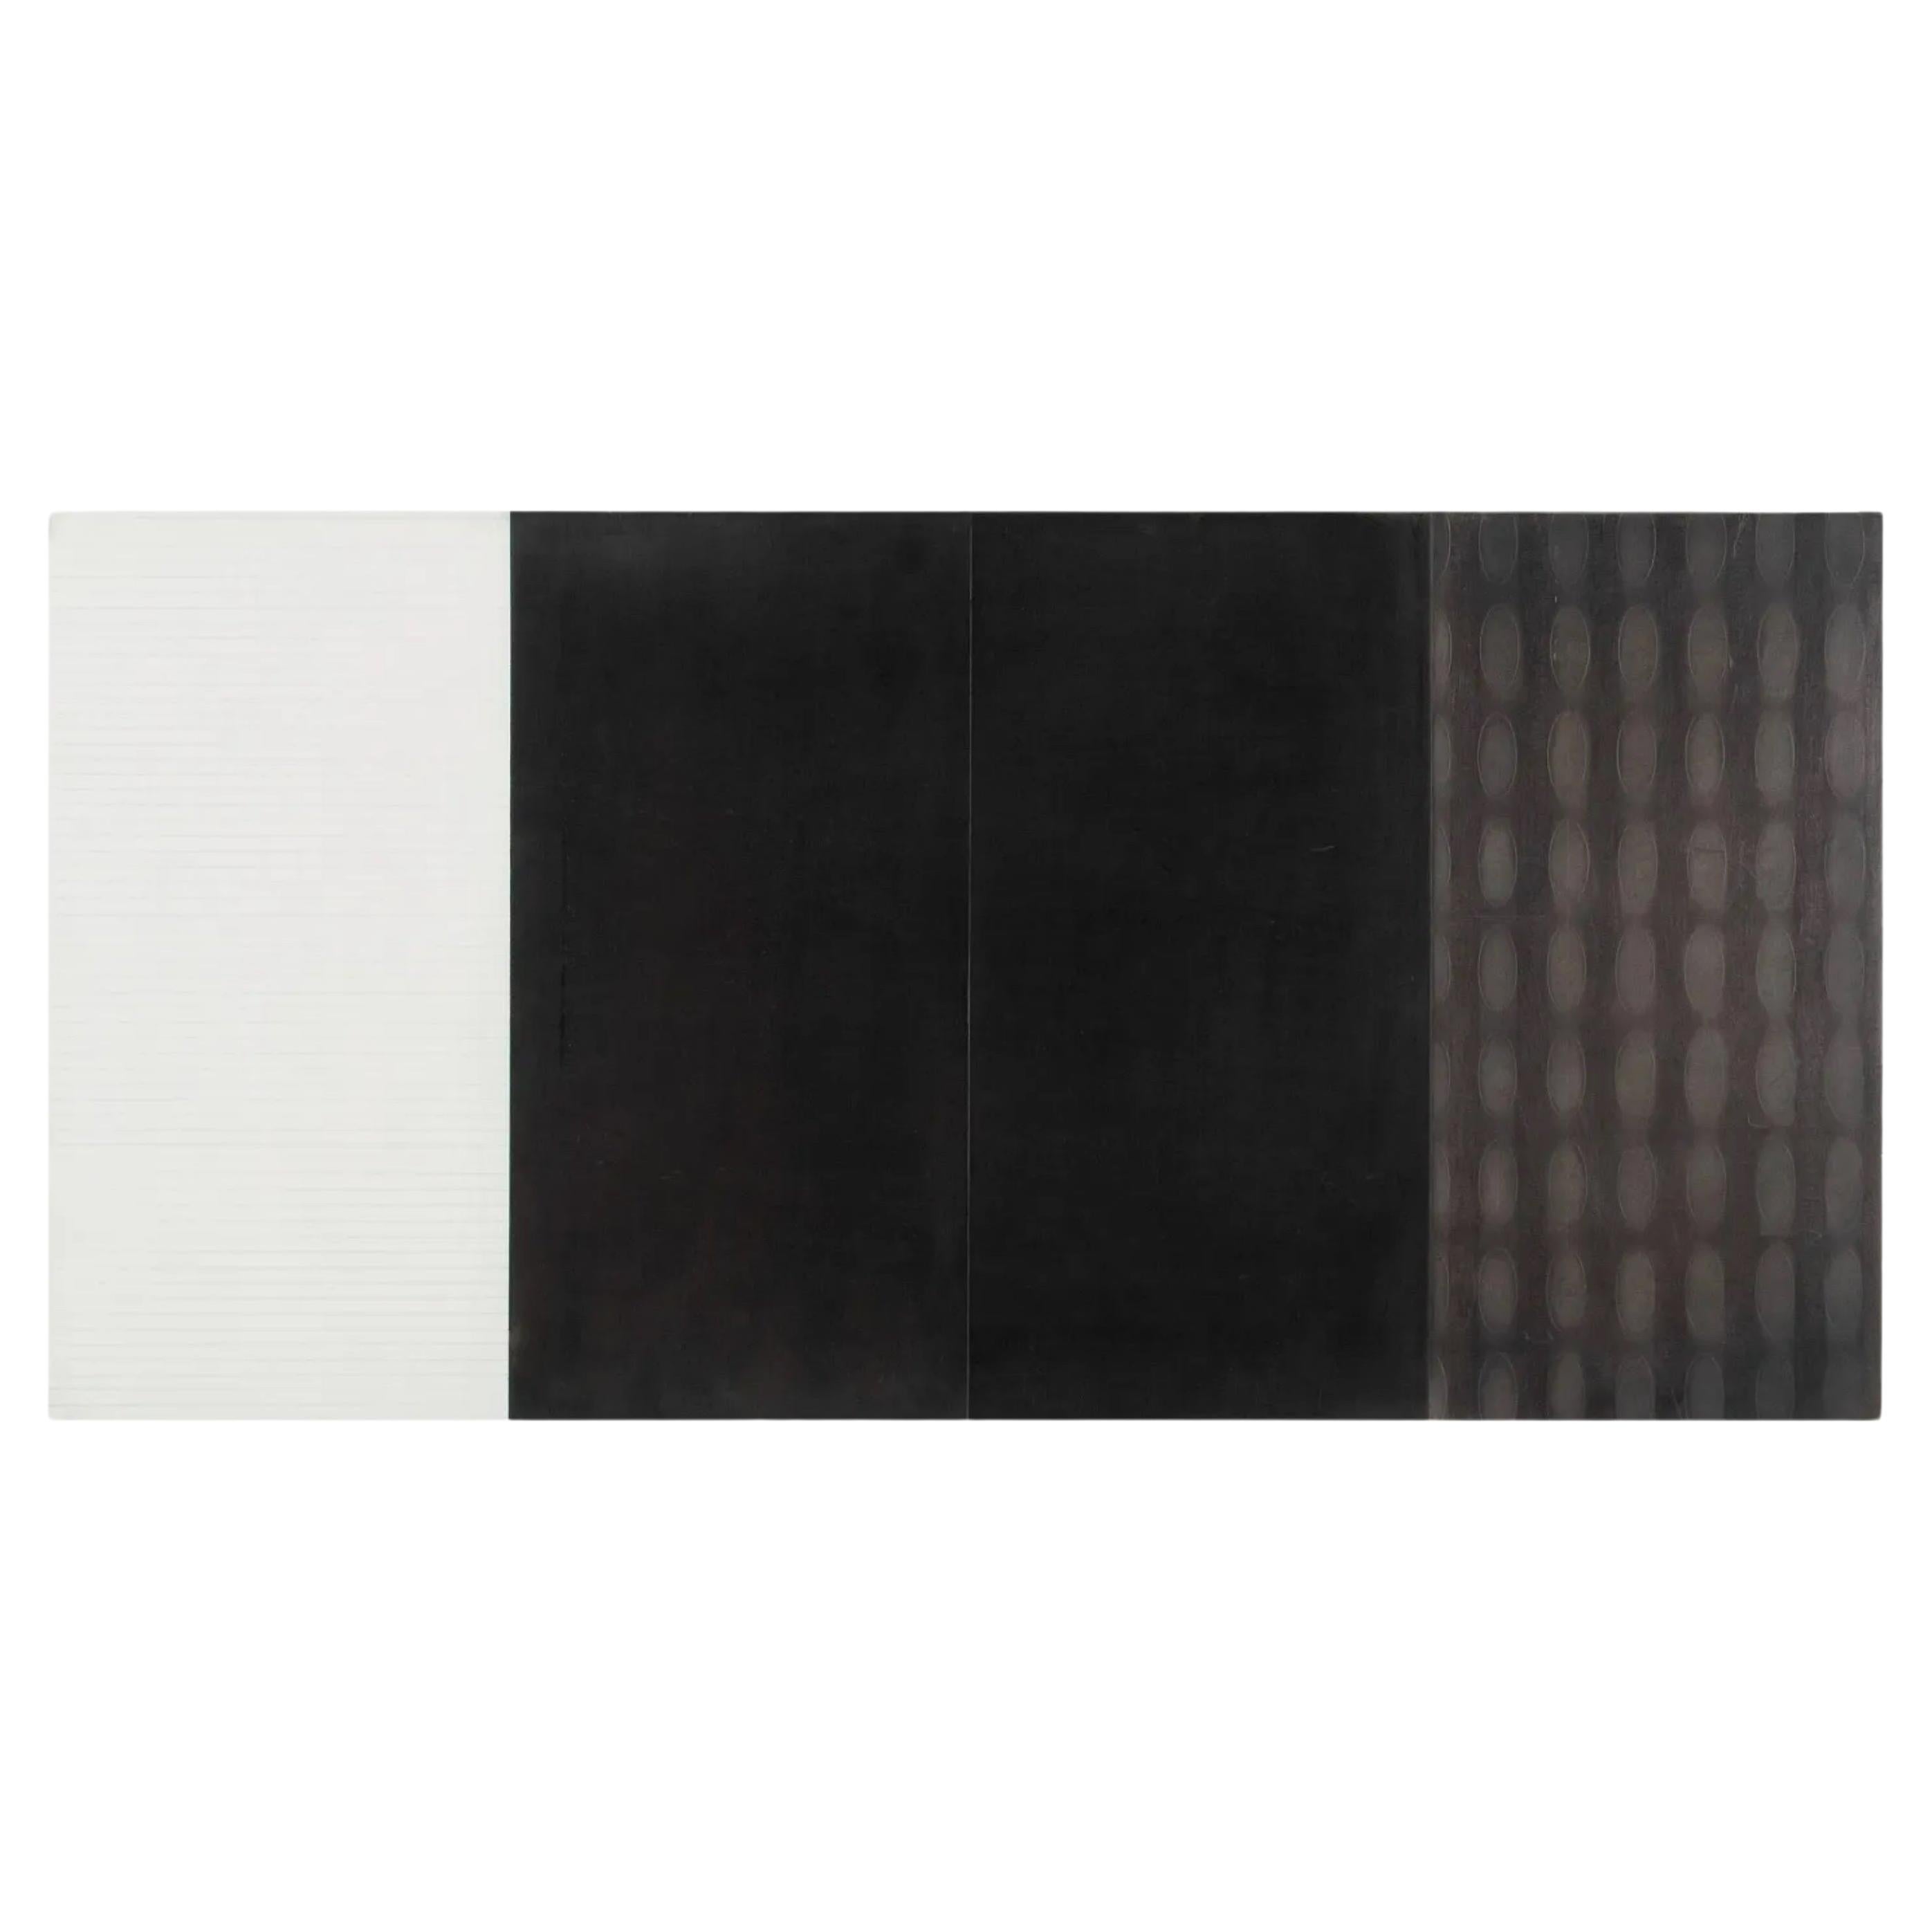 Greg Parker, Untitled, 1988; Graphite and Oil on Gessoed Panel